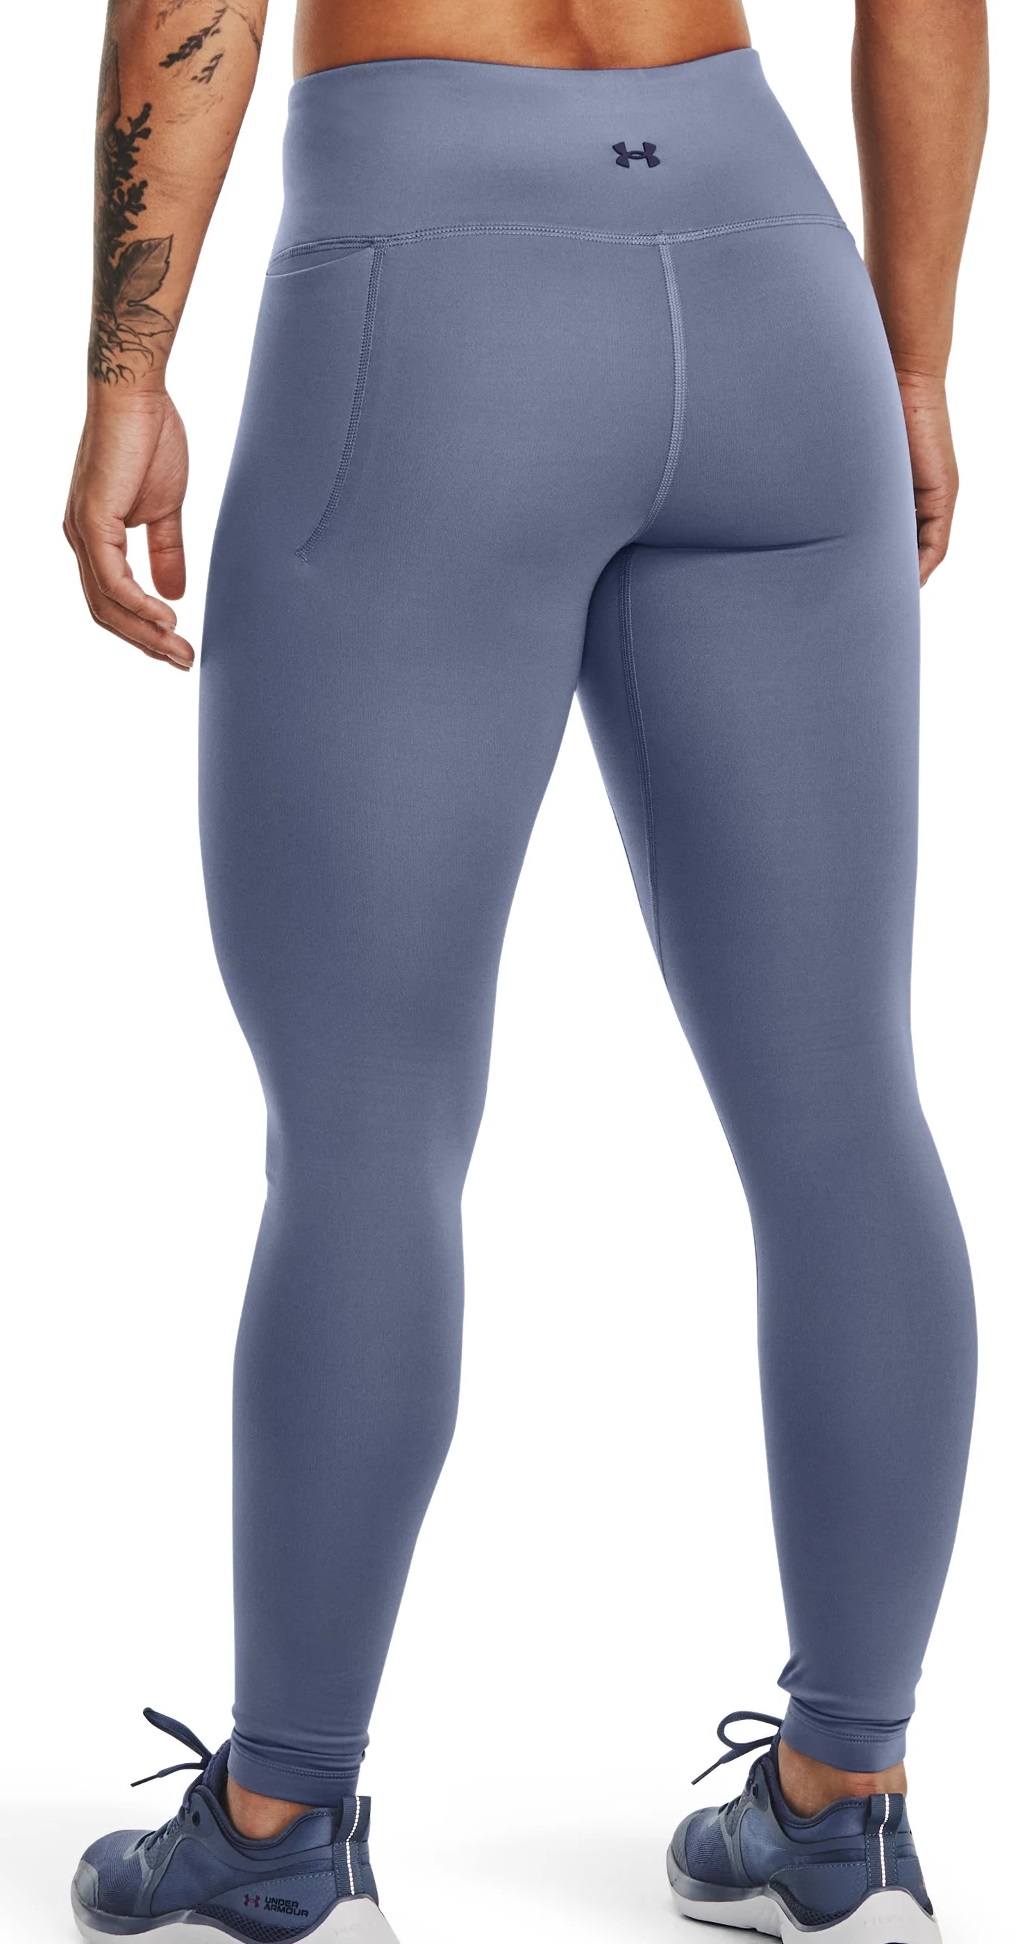 https://i1.t4s.cz/products/1373966-767/under-armour-meridian-cw-legging-ppl-503406-1373966-767.jpg